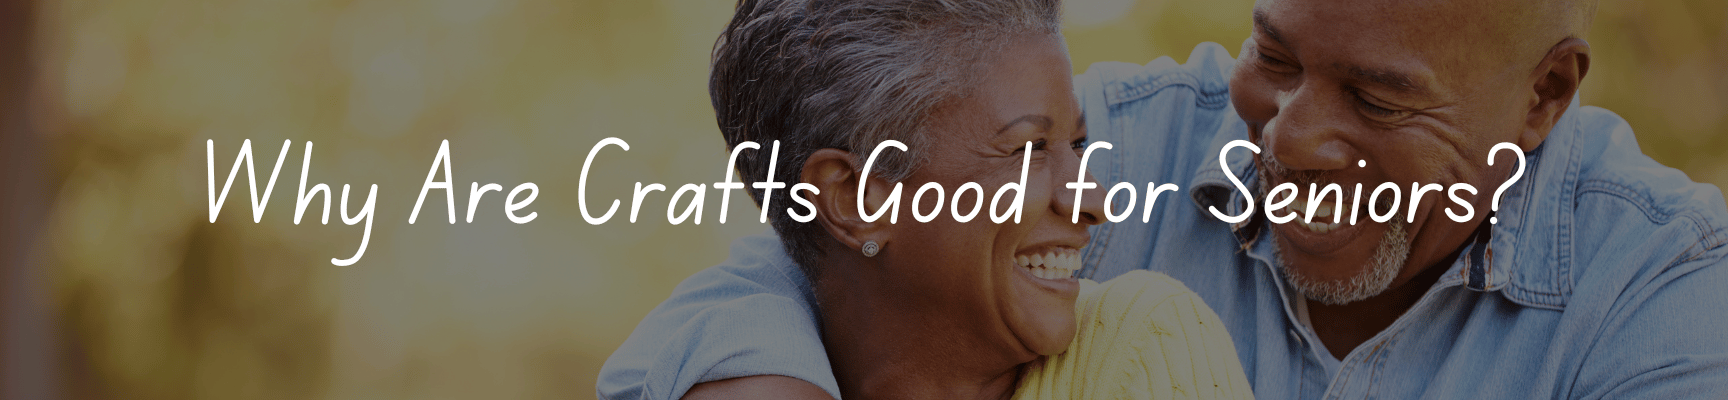 Why Are Crafts Good for Seniors